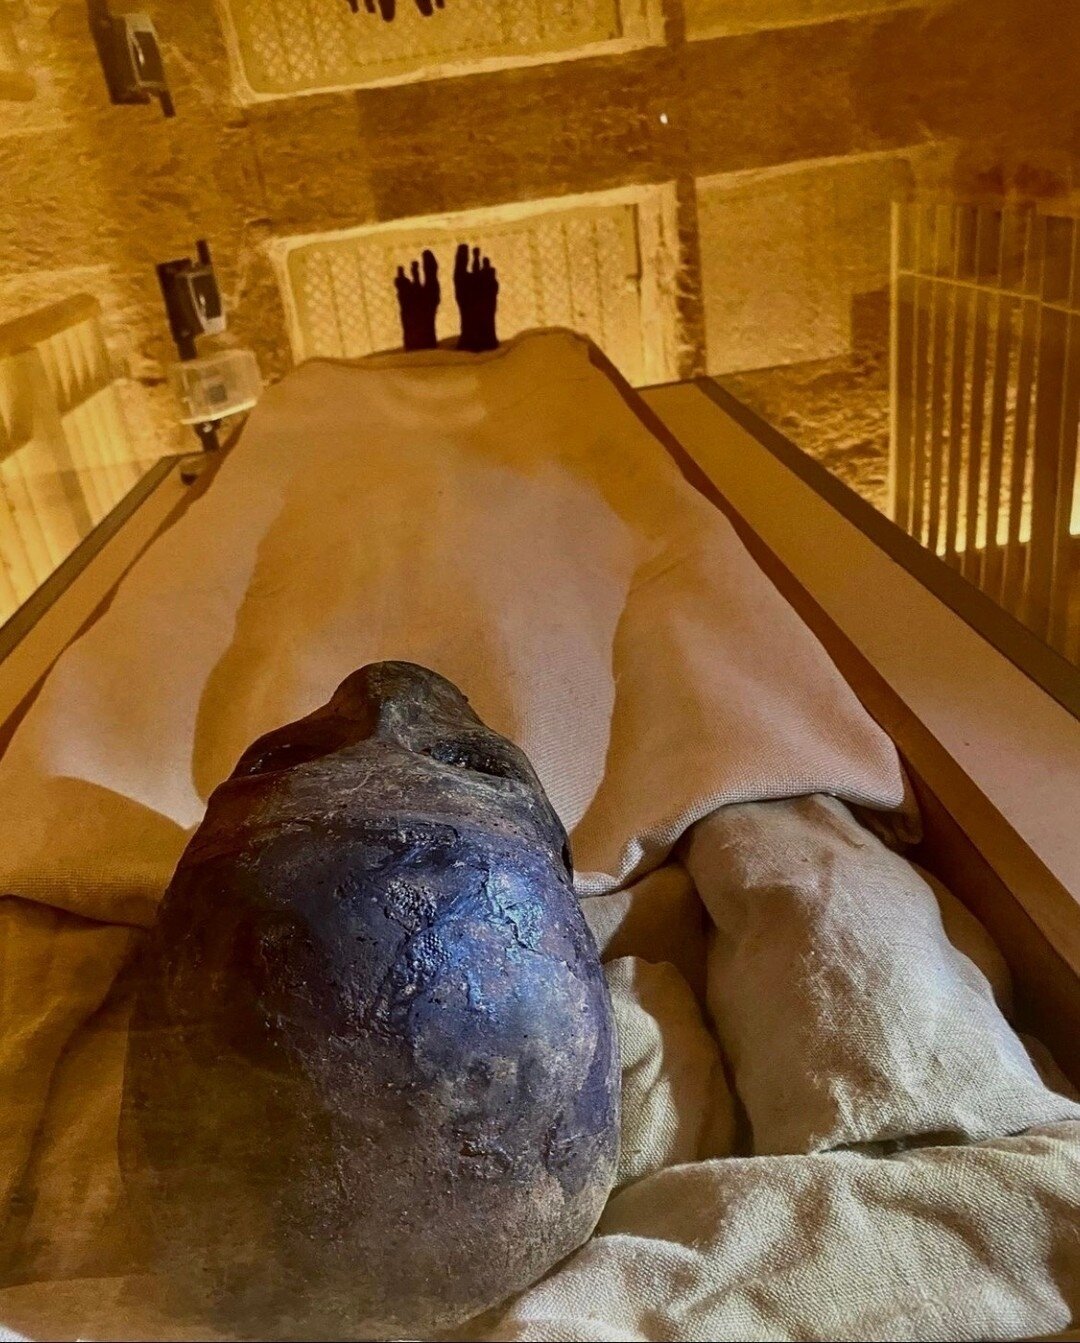 POV: King Tut's Tomb, would you visit? 👀 🇪🇬⁠⁠
⁠
Artifacts from King Tut&rsquo;s tomb have toured the world in several blockbuster museum shows, including the worldwide 1972-79 &ldquo;Treasures of Tutankhamun&rdquo; exhibitions. ⁠
⁠
Eight million v